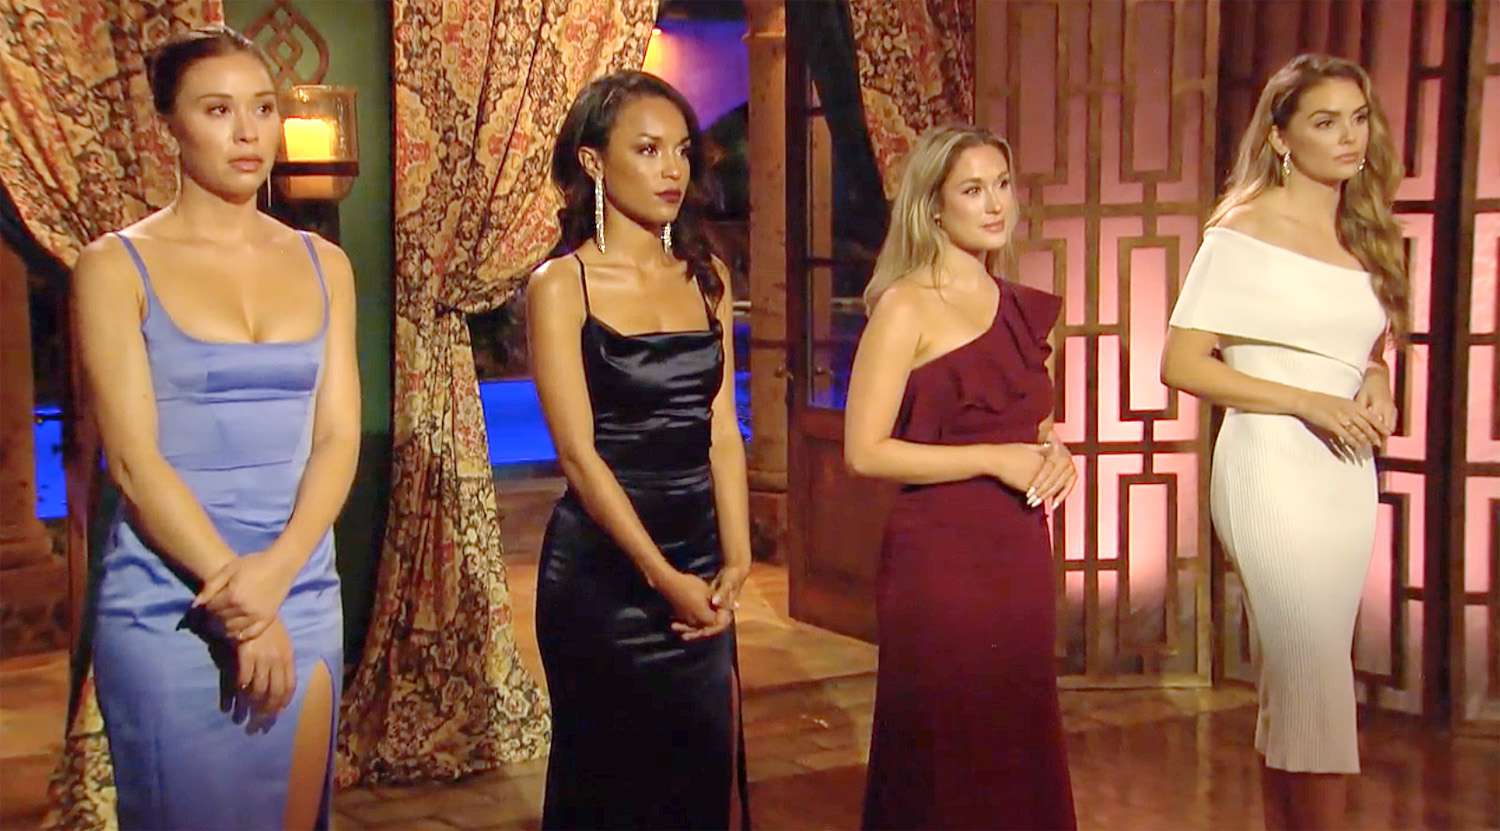 Gabby, Serene, Rachel, and susie from The Bachelor